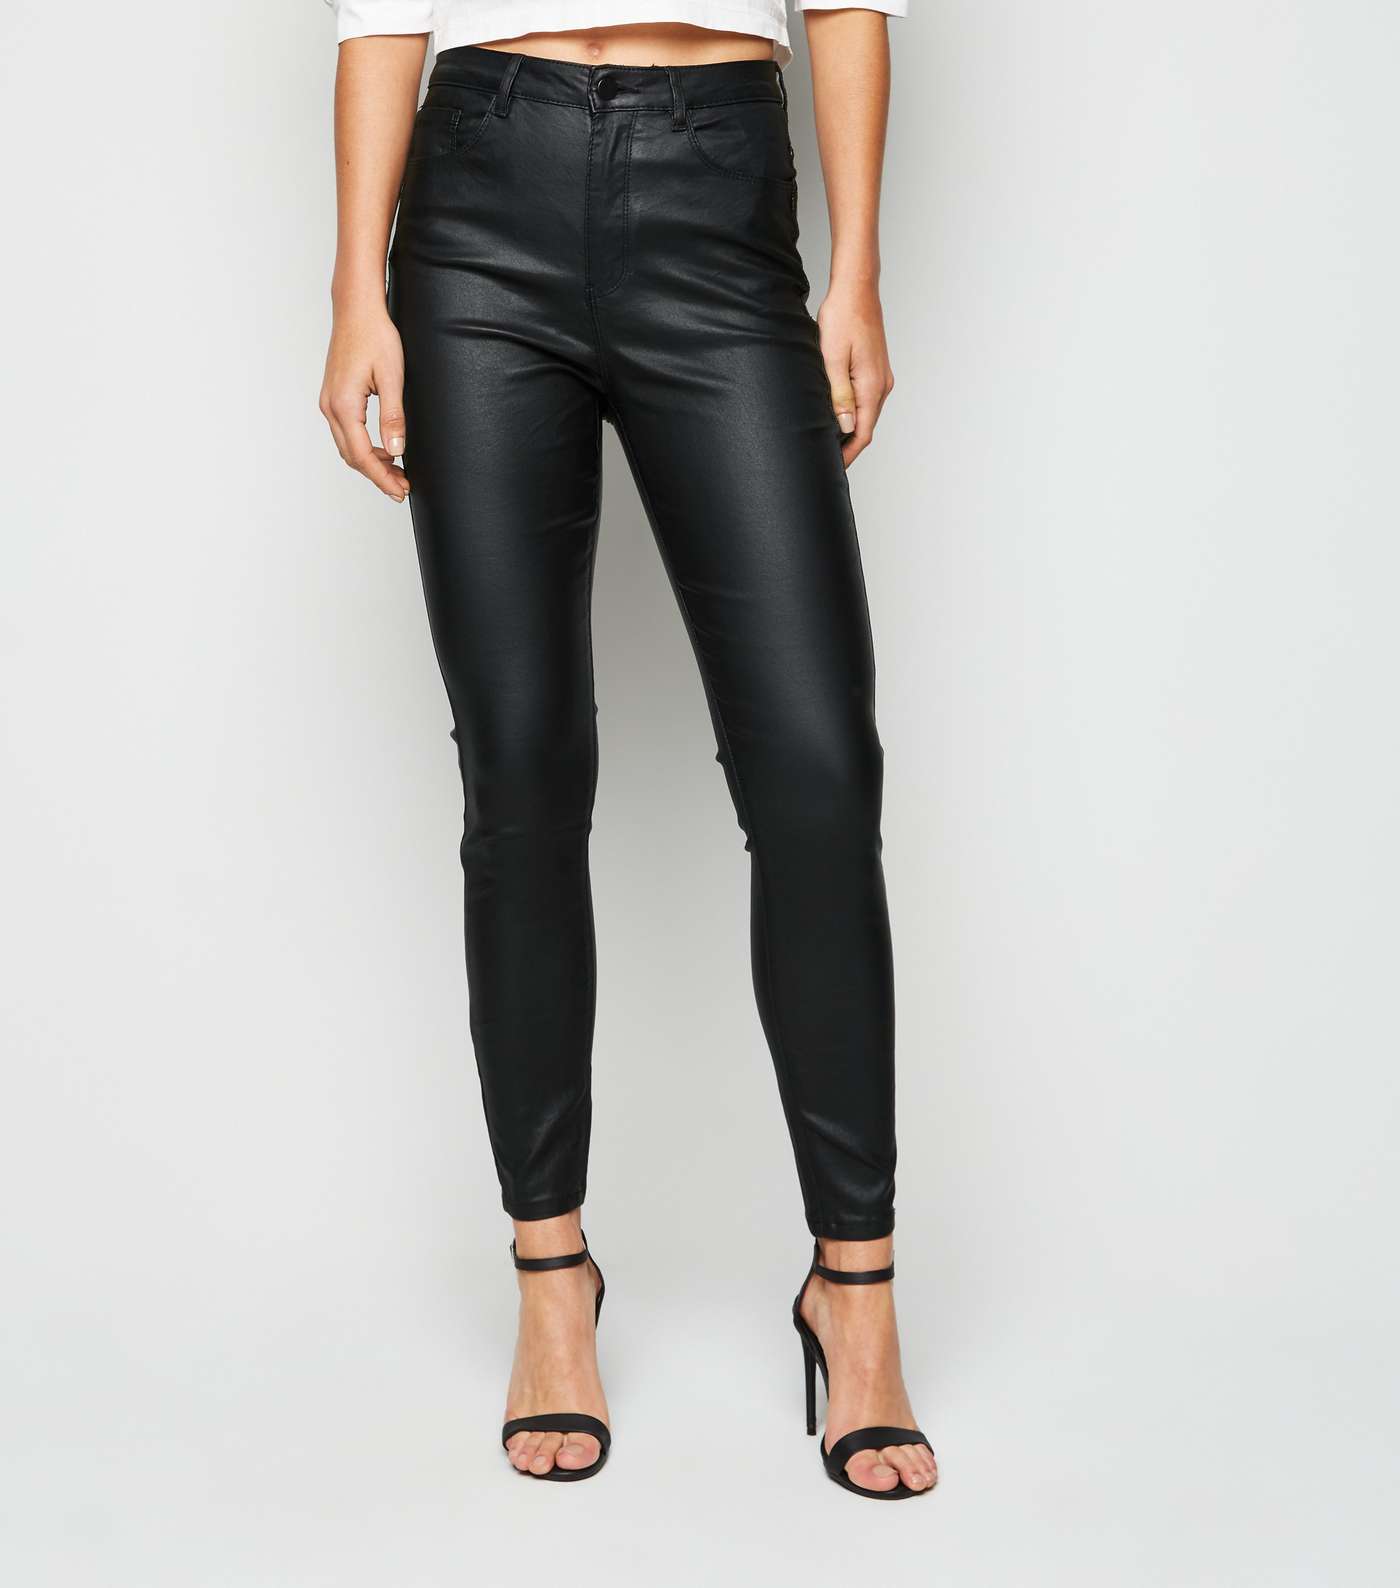 Urban Bliss Black Leather-Look Skinny Jeans  Image 2